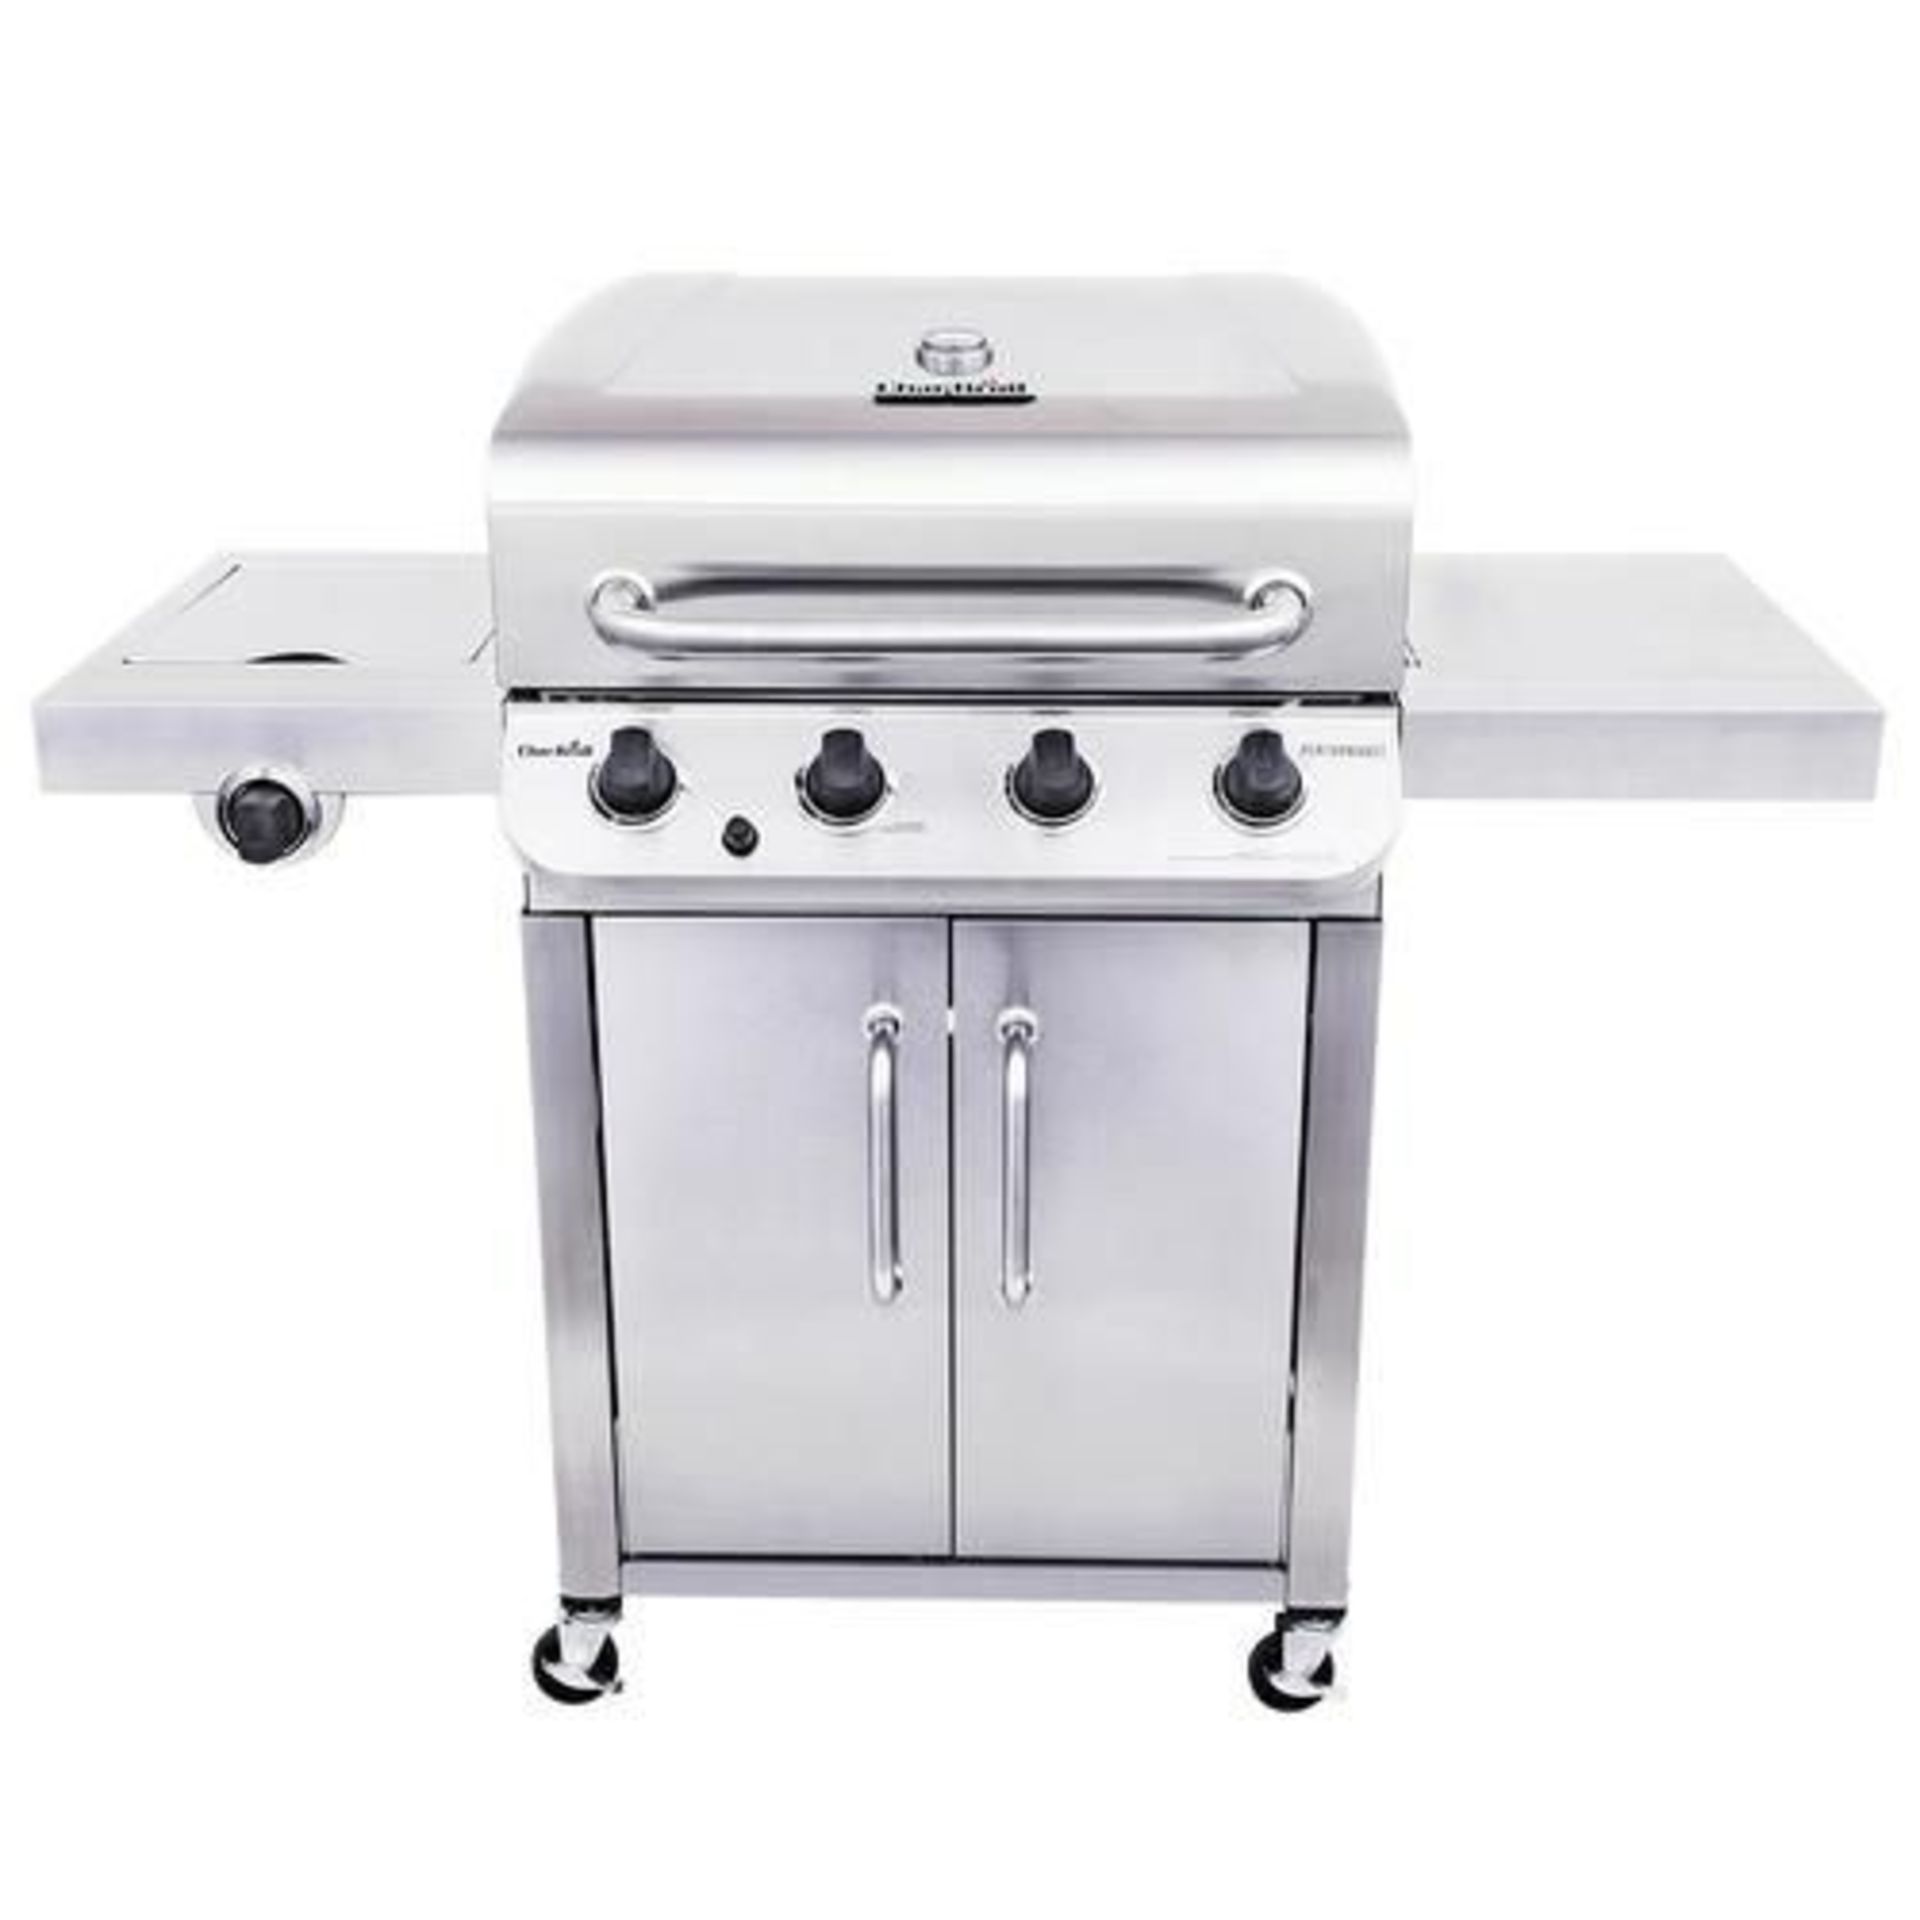 Char-Broil Performance Stainless 4-Burner Gas Grill with 1 Side Burner - Image 2 of 2